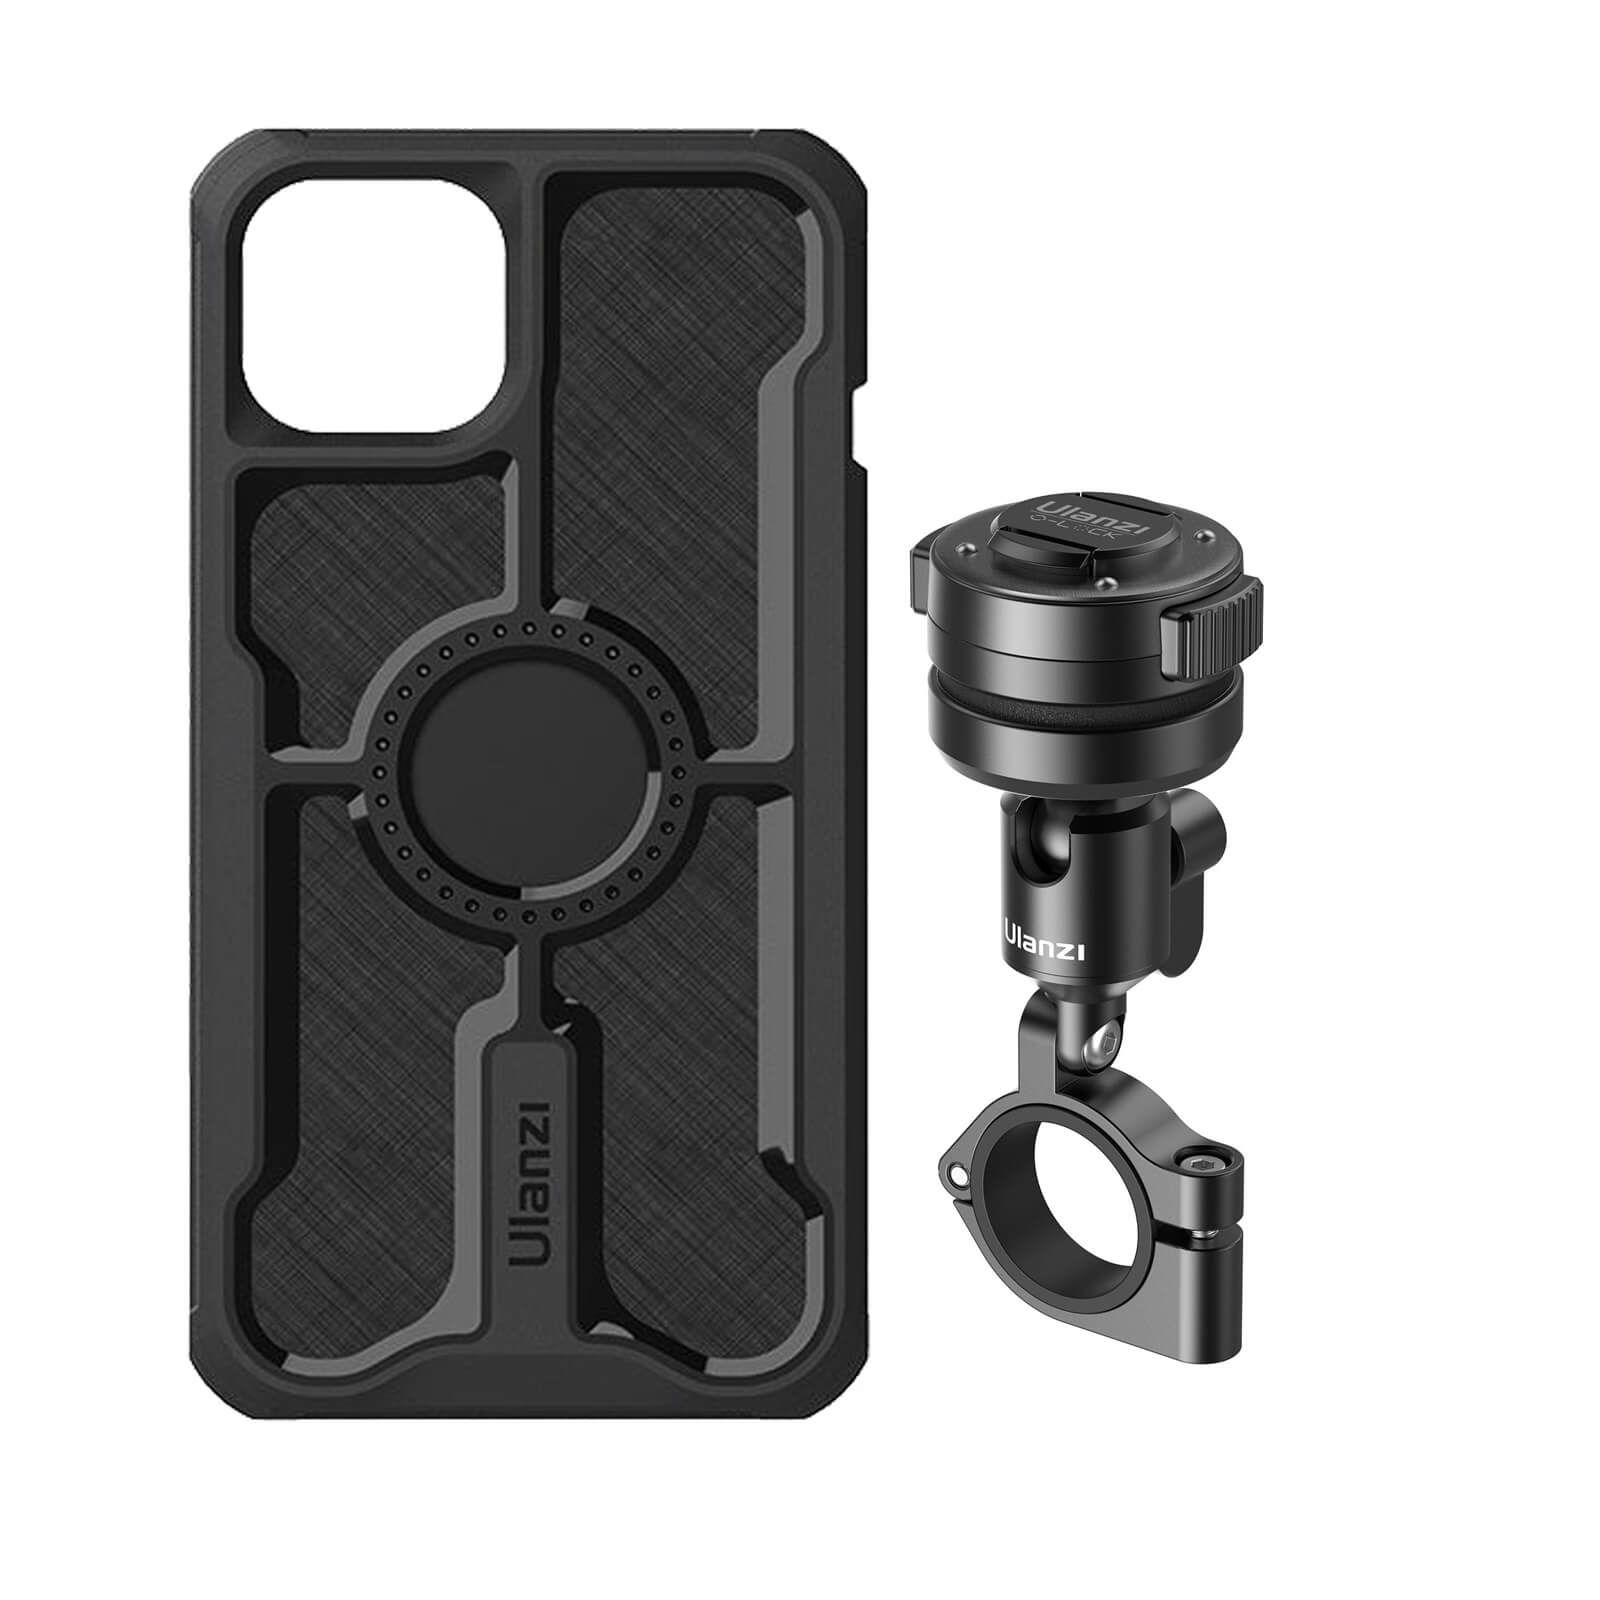 Ulanzi O-LOCK iPhone Quick Release Kit for Motorcycle